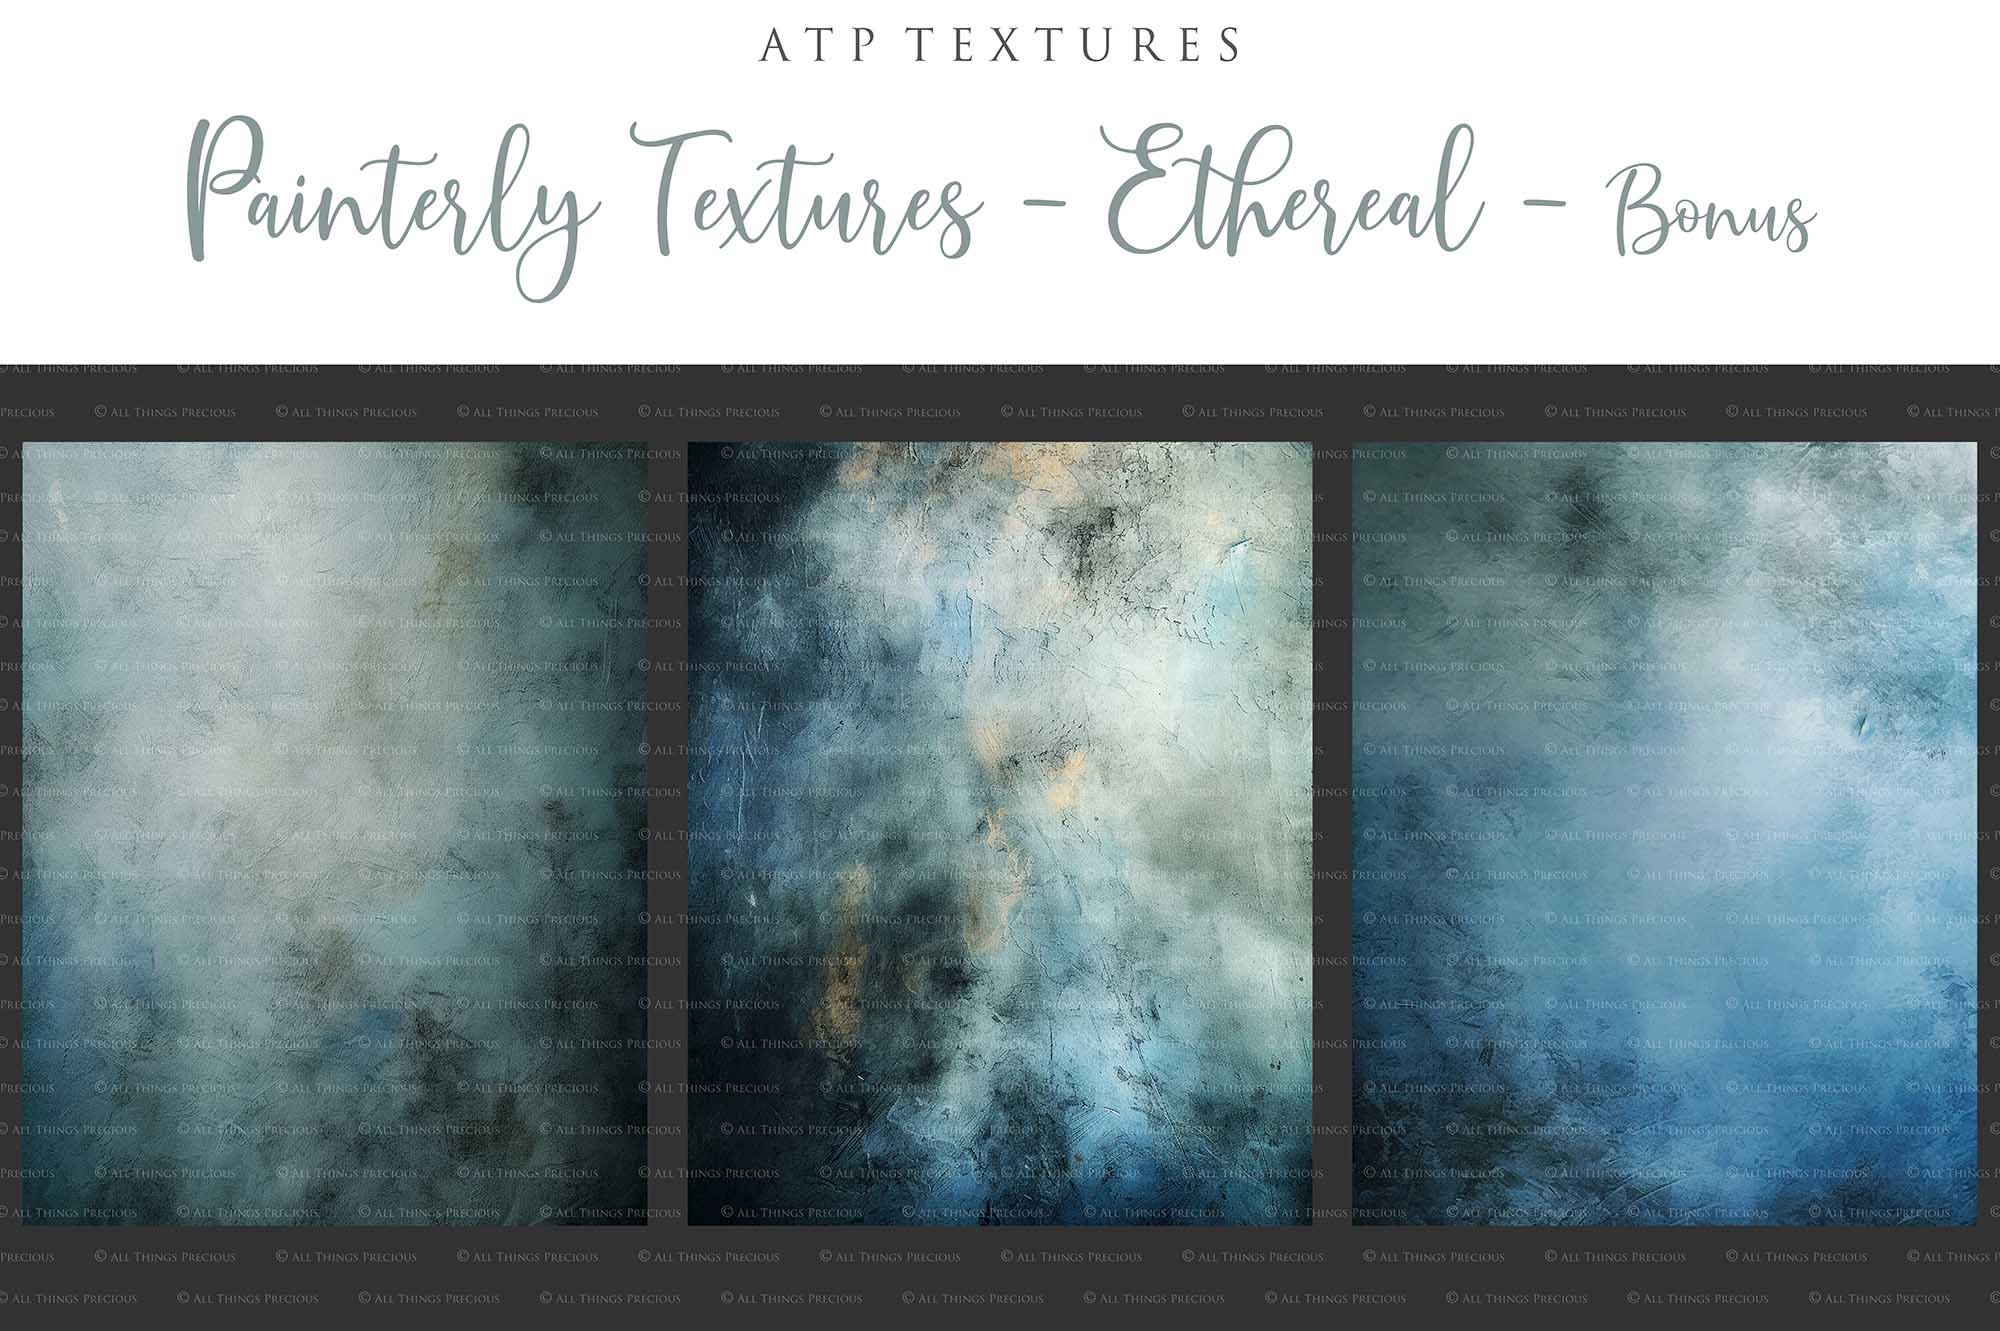 15 Painterly Textures / Digital Backgrounds - ETHEREAL - Set 4